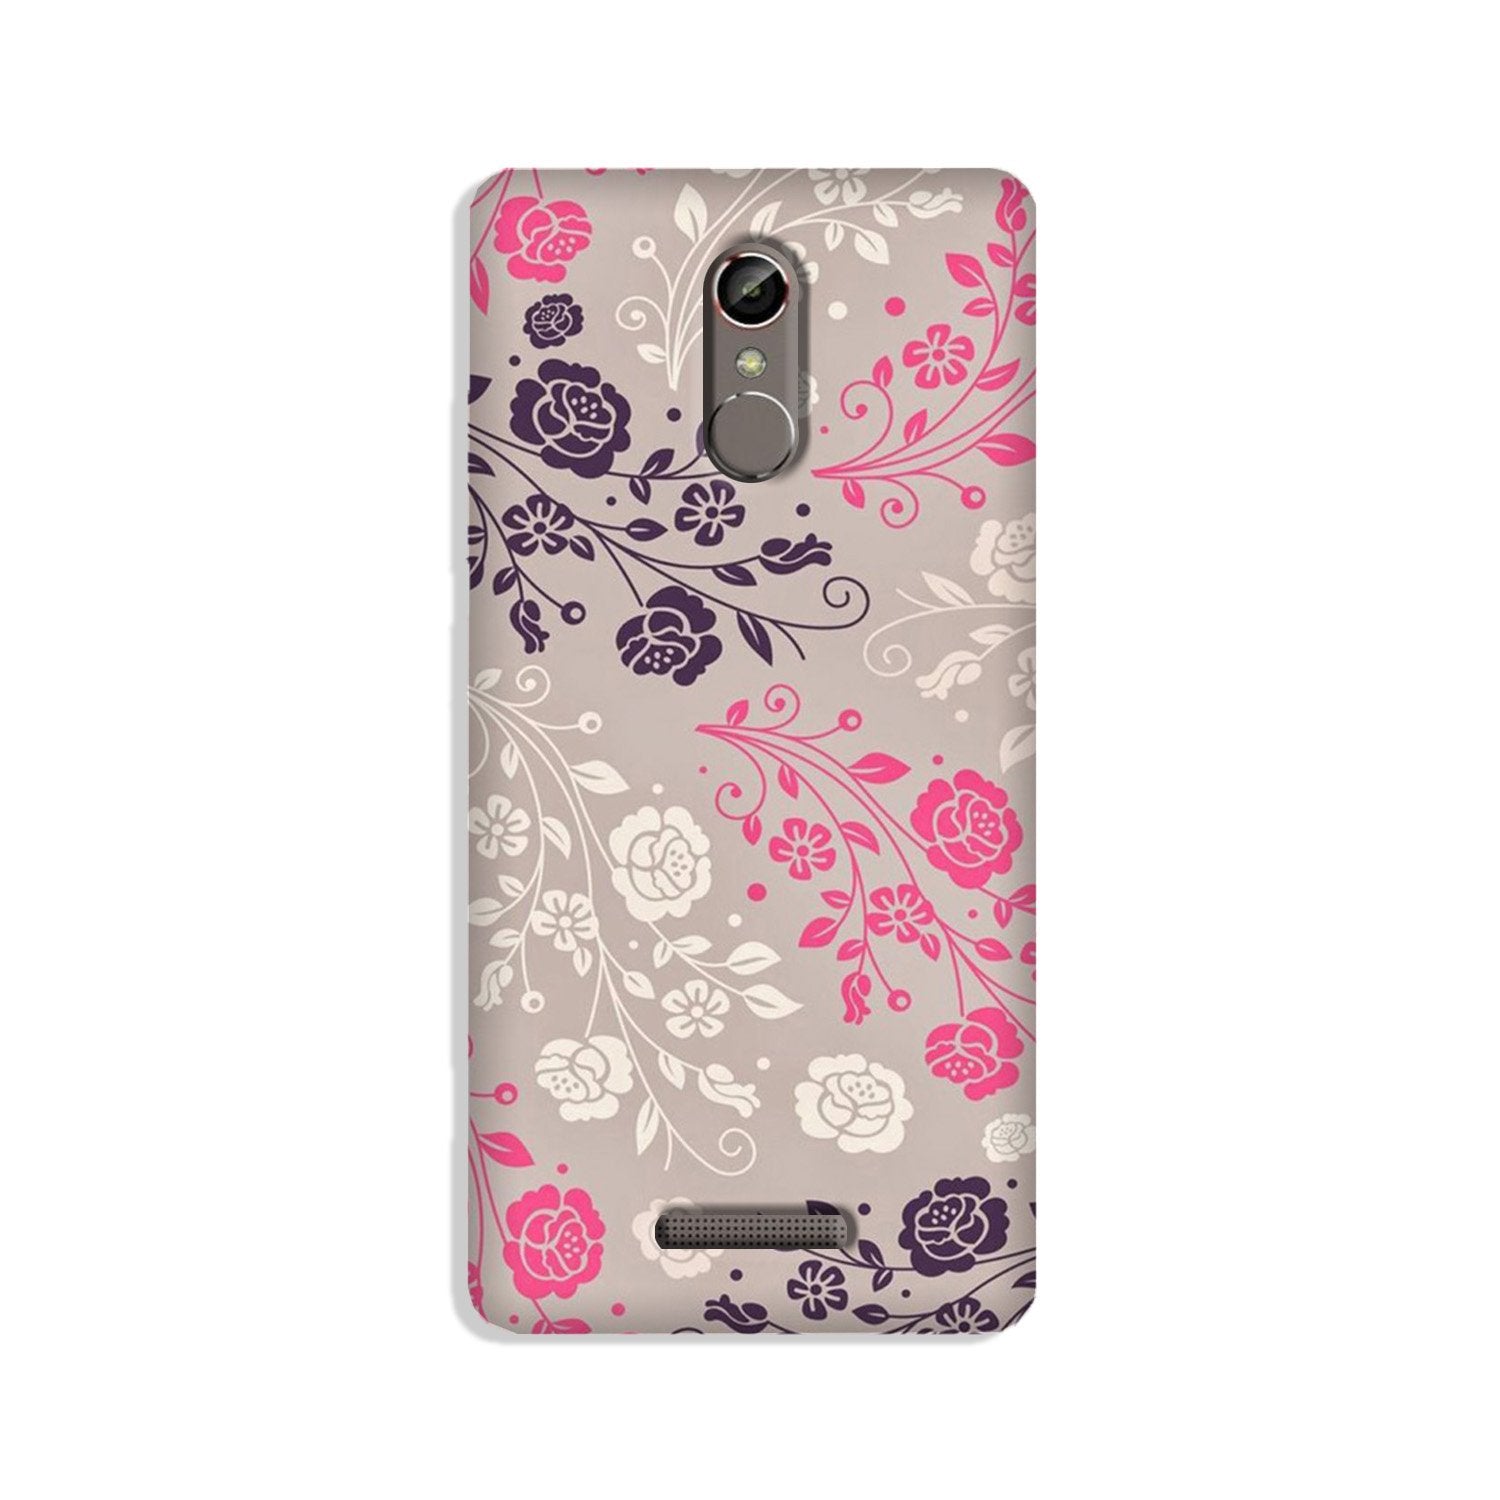 Pattern2 Case for Gionee S6s